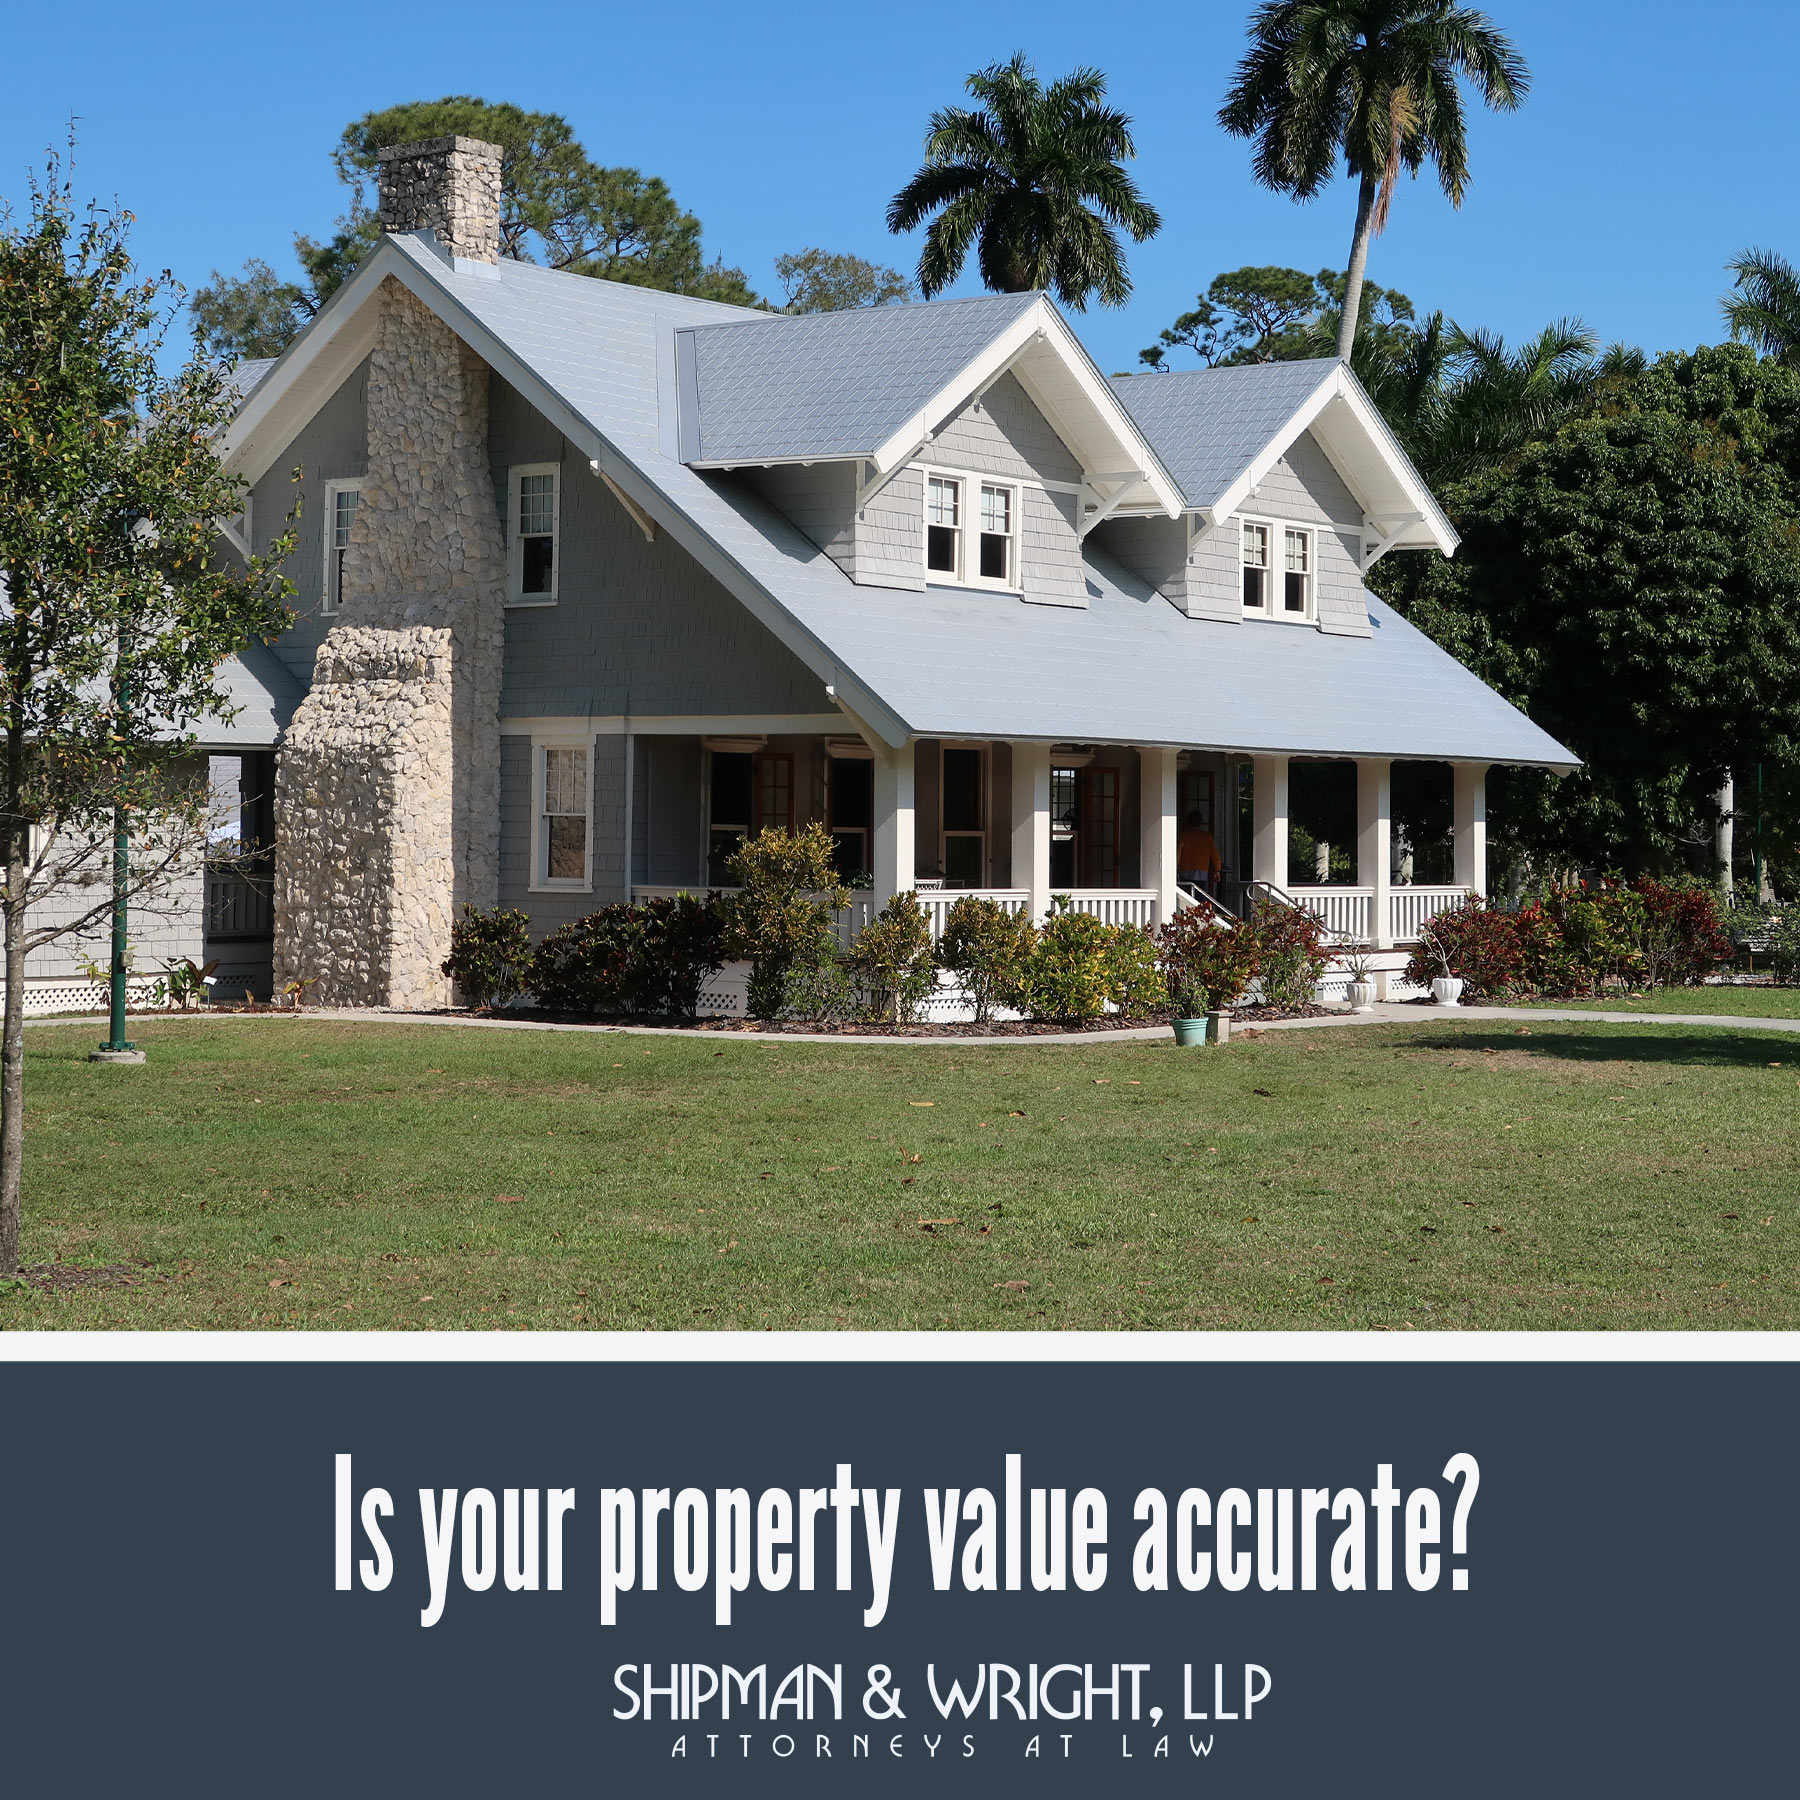 Property values are often determined by various factors such as location, market conditions, and property attributes, and can be best estimated by a licensed professional appraiser or a real estate agent.